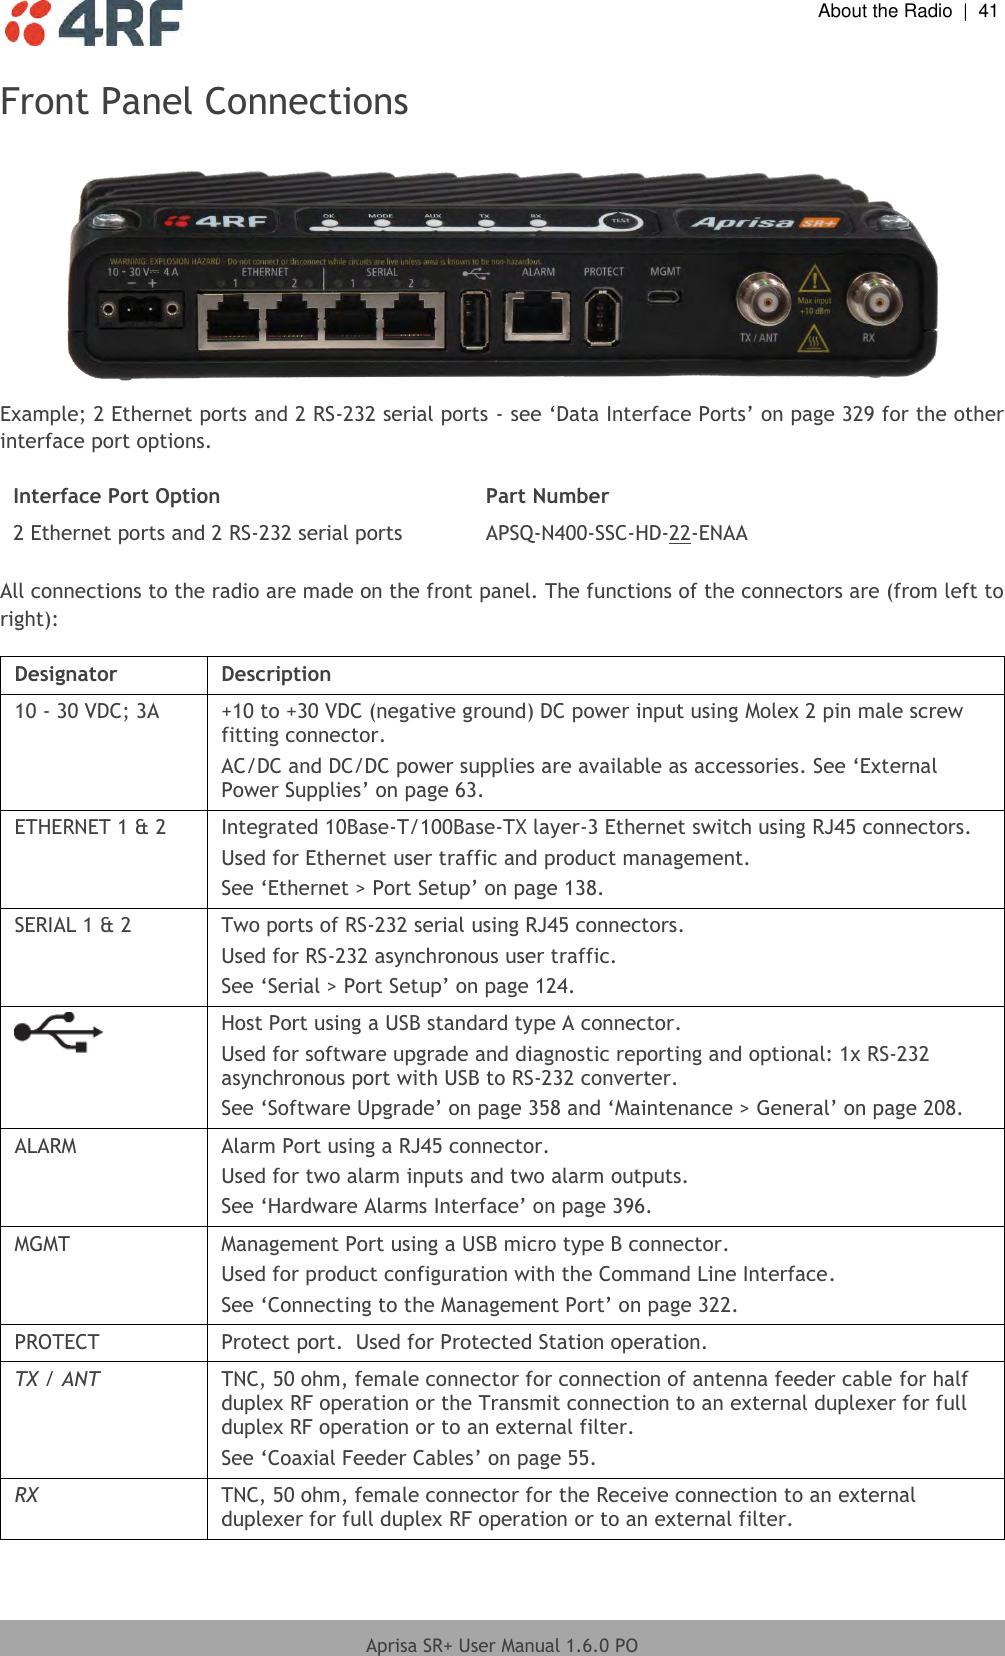  About the Radio  |  41  Aprisa SR+ User Manual 1.6.0 PO  Front Panel Connections   Example; 2 Ethernet ports and 2 RS-232 serial ports - see ‘Data Interface Ports’ on page 329 for the other interface port options.  Interface Port Option Part Number 2 Ethernet ports and 2 RS-232 serial ports APSQ-N400-SSC-HD-22-ENAA  All connections to the radio are made on the front panel. The functions of the connectors are (from left to right):  Designator Description 10 - 30 VDC; 3A +10 to +30 VDC (negative ground) DC power input using Molex 2 pin male screw fitting connector. AC/DC and DC/DC power supplies are available as accessories. See ‘External Power Supplies’ on page 63. ETHERNET 1 &amp; 2 Integrated 10Base-T/100Base-TX layer-3 Ethernet switch using RJ45 connectors. Used for Ethernet user traffic and product management. See ‘Ethernet &gt; Port Setup’ on page 138. SERIAL 1 &amp; 2 Two ports of RS-232 serial using RJ45 connectors. Used for RS-232 asynchronous user traffic. See ‘Serial &gt; Port Setup’ on page 124.  Host Port using a USB standard type A connector. Used for software upgrade and diagnostic reporting and optional: 1x RS-232 asynchronous port with USB to RS-232 converter. See ‘Software Upgrade’ on page 358 and ‘Maintenance &gt; General’ on page 208. ALARM Alarm Port using a RJ45 connector. Used for two alarm inputs and two alarm outputs. See ‘Hardware Alarms Interface’ on page 396. MGMT Management Port using a USB micro type B connector. Used for product configuration with the Command Line Interface. See ‘Connecting to the Management Port’ on page 322. PROTECT Protect port.  Used for Protected Station operation. TX / ANT TNC, 50 ohm, female connector for connection of antenna feeder cable for half duplex RF operation or the Transmit connection to an external duplexer for full duplex RF operation or to an external filter. See ‘Coaxial Feeder Cables’ on page 55. RX TNC, 50 ohm, female connector for the Receive connection to an external duplexer for full duplex RF operation or to an external filter.  